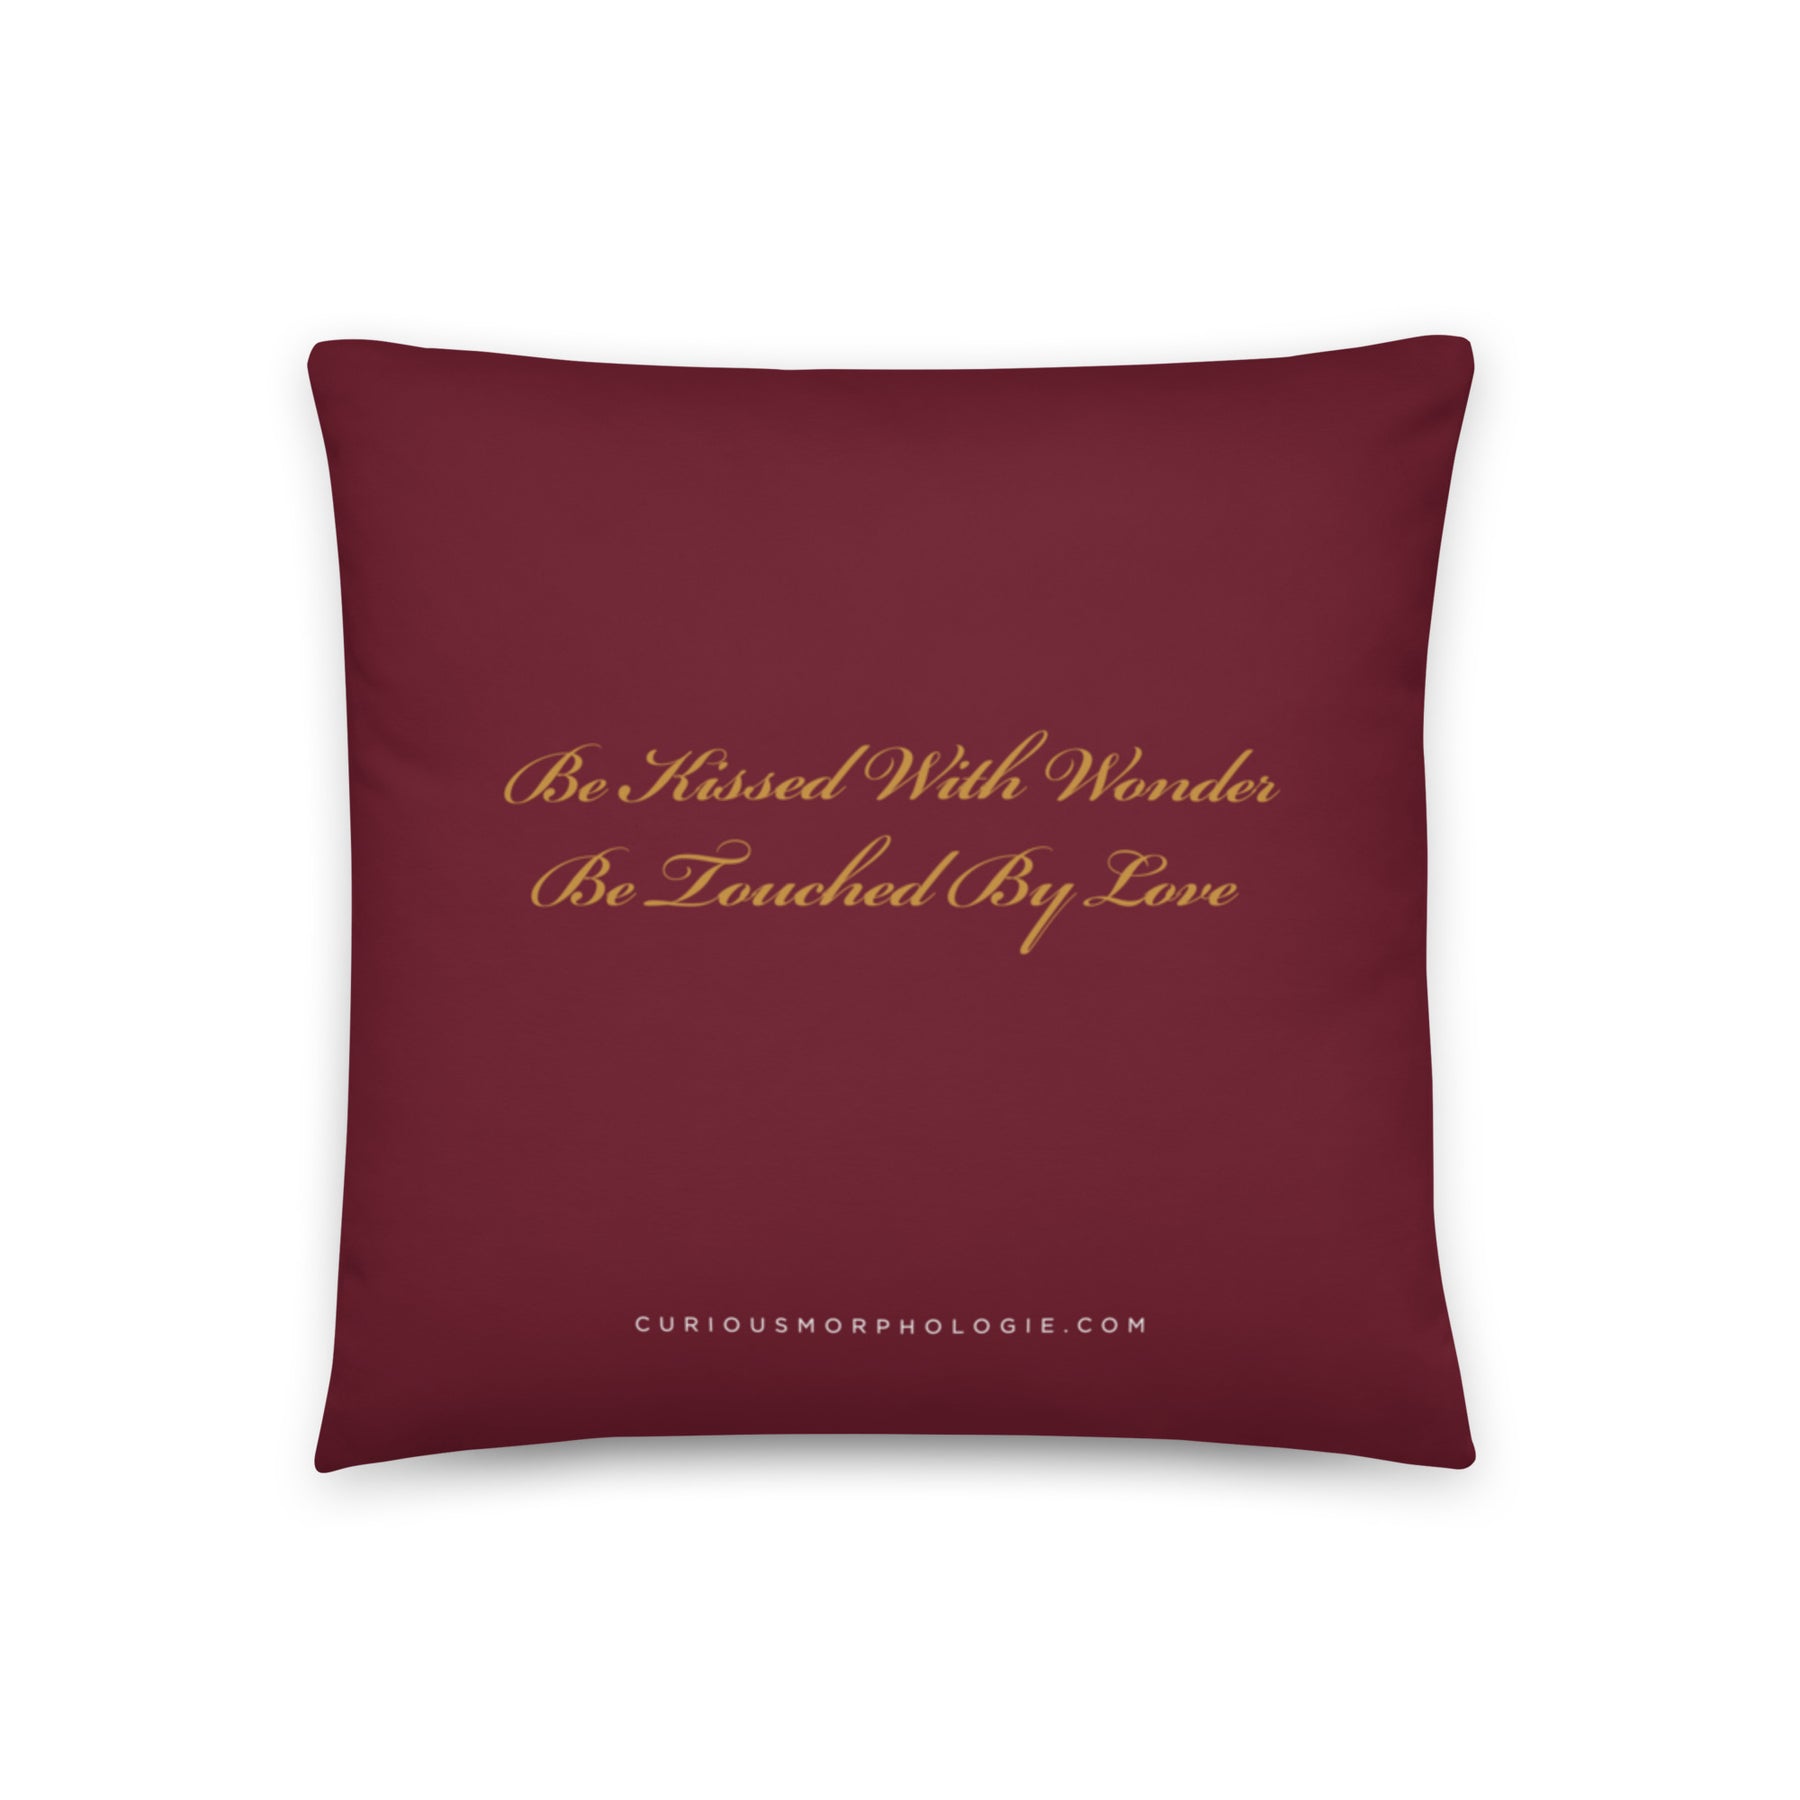 Mistle Dove Cuddle Pillow (Two-Sided)